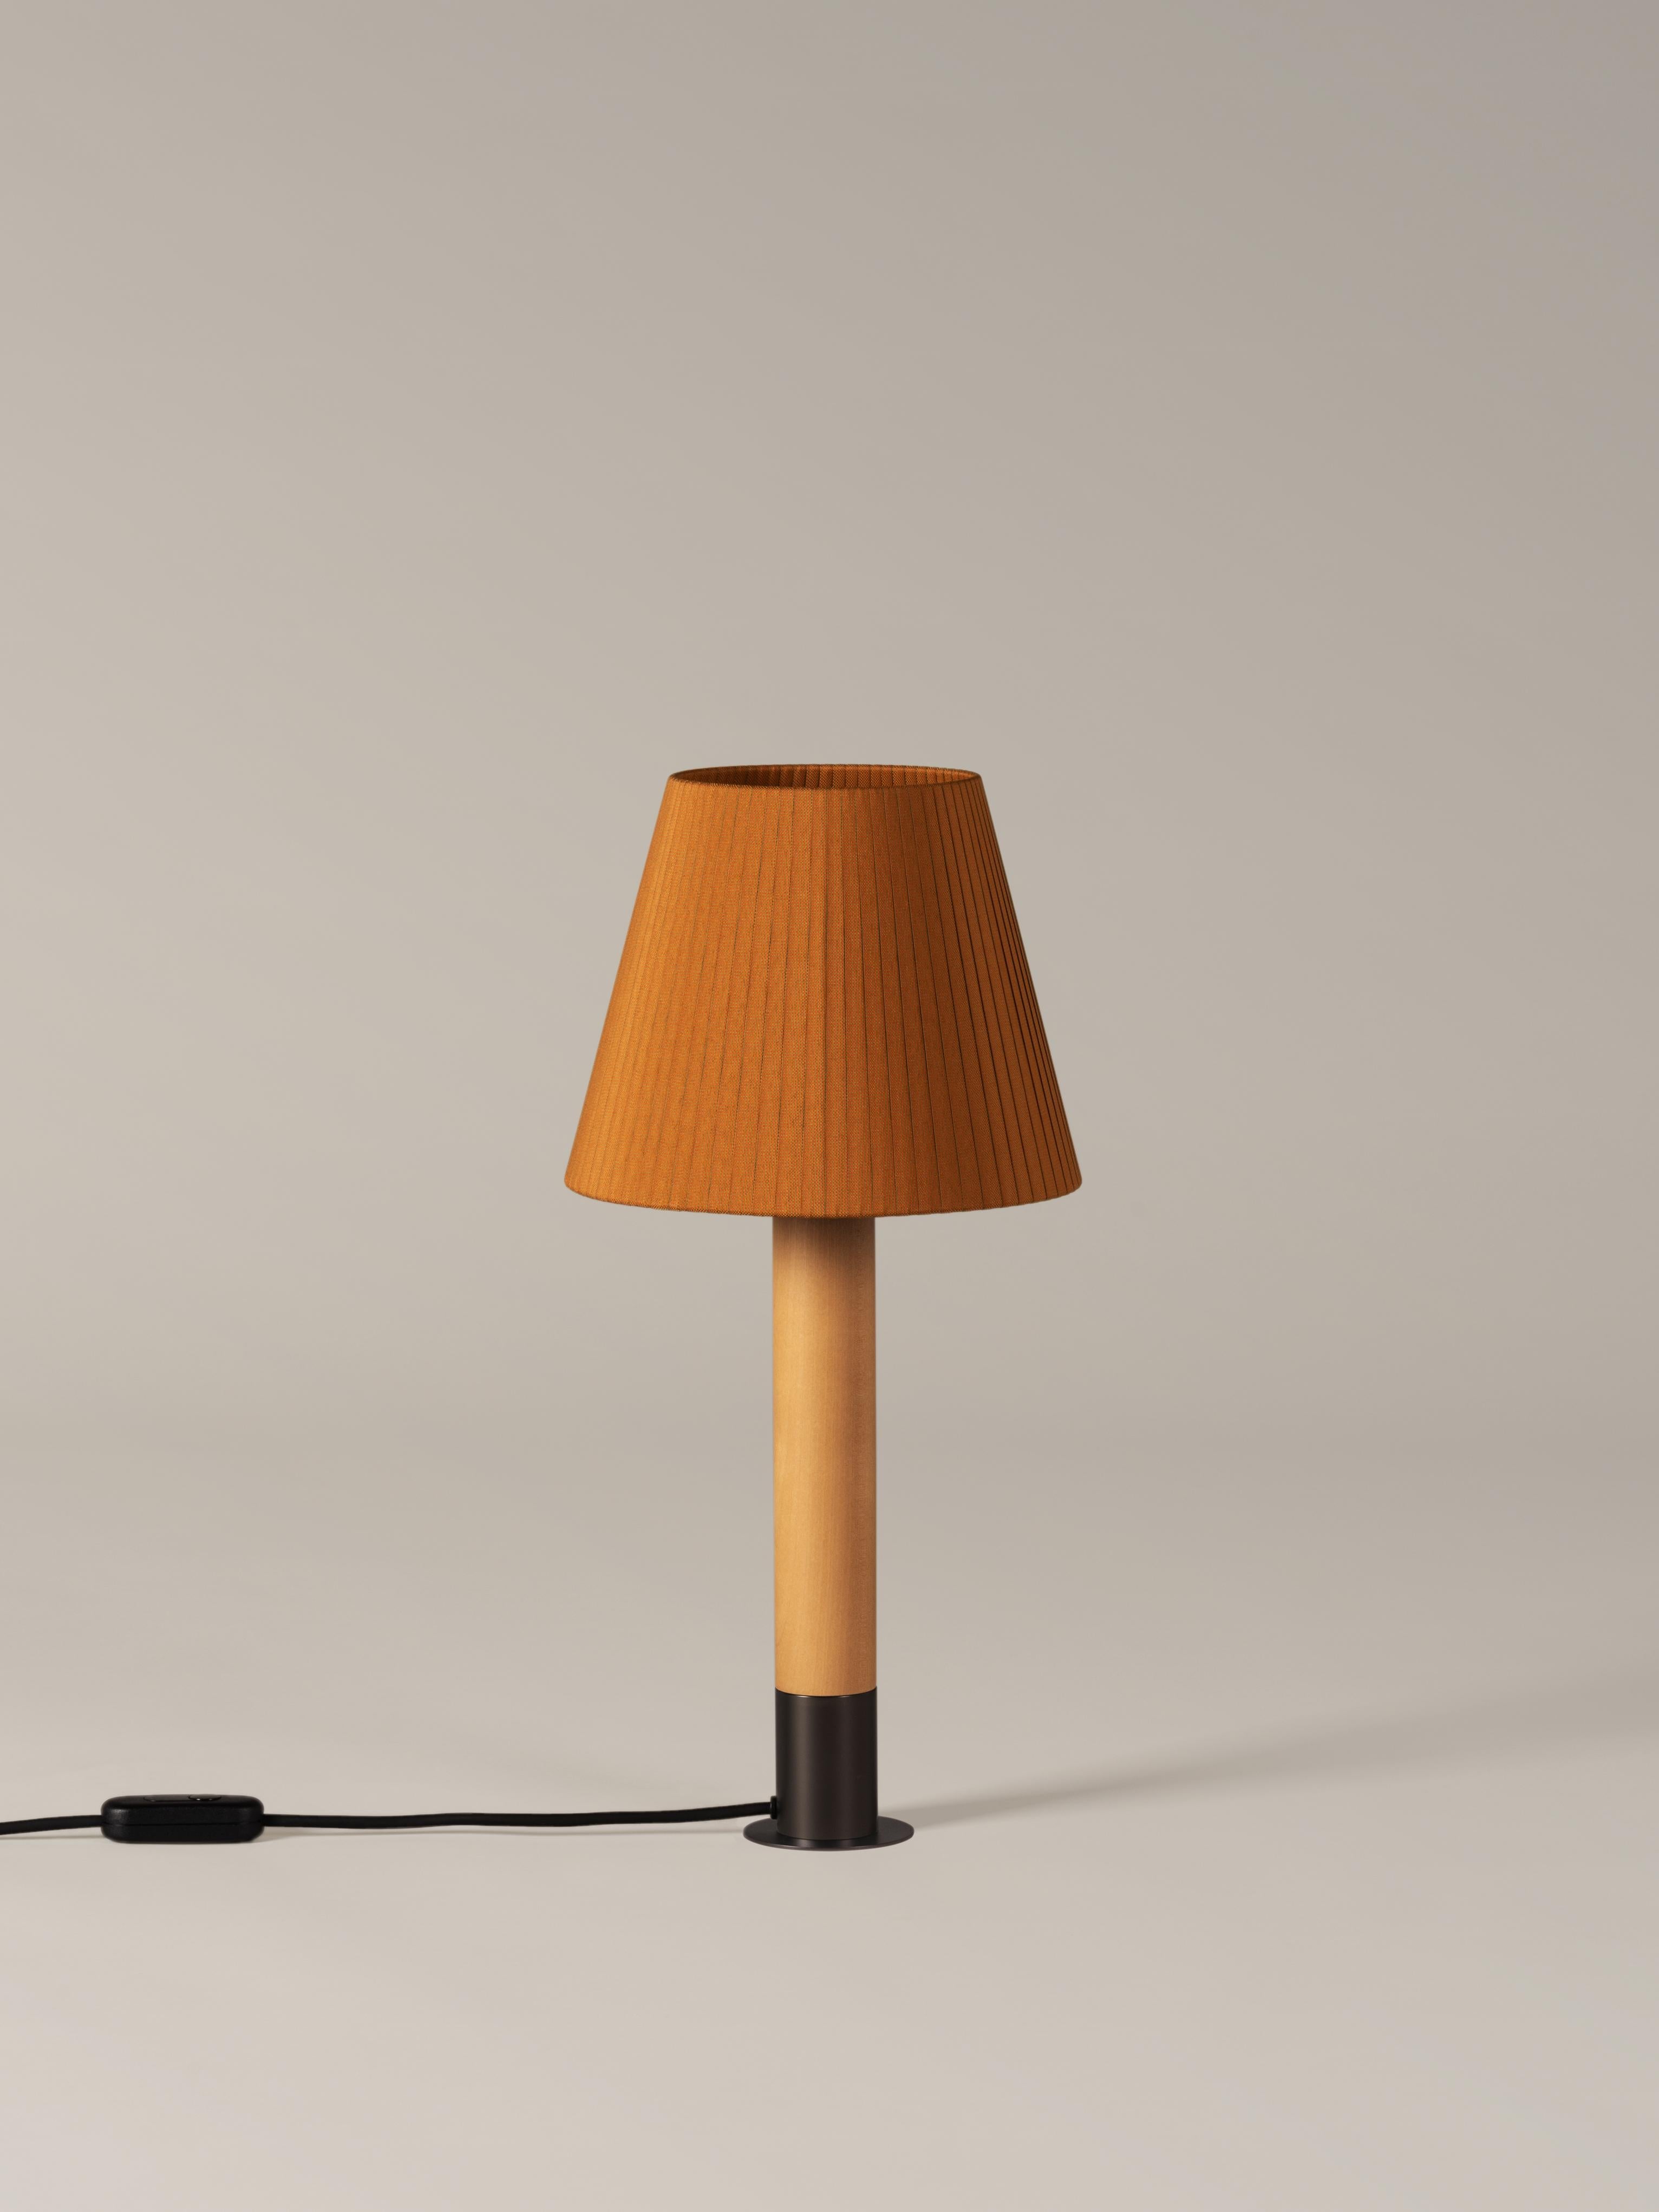 Bronze and Mustard Básica M1 table lamp by Santiago Roqueta, Santa & Cole
Dimensions: D 25 x H 52 cm
Materials: Bronze, birch wood, ribbon.
Available in other shade colors and with or without the stabilizing disc.
Available in nickel or bronze.

The